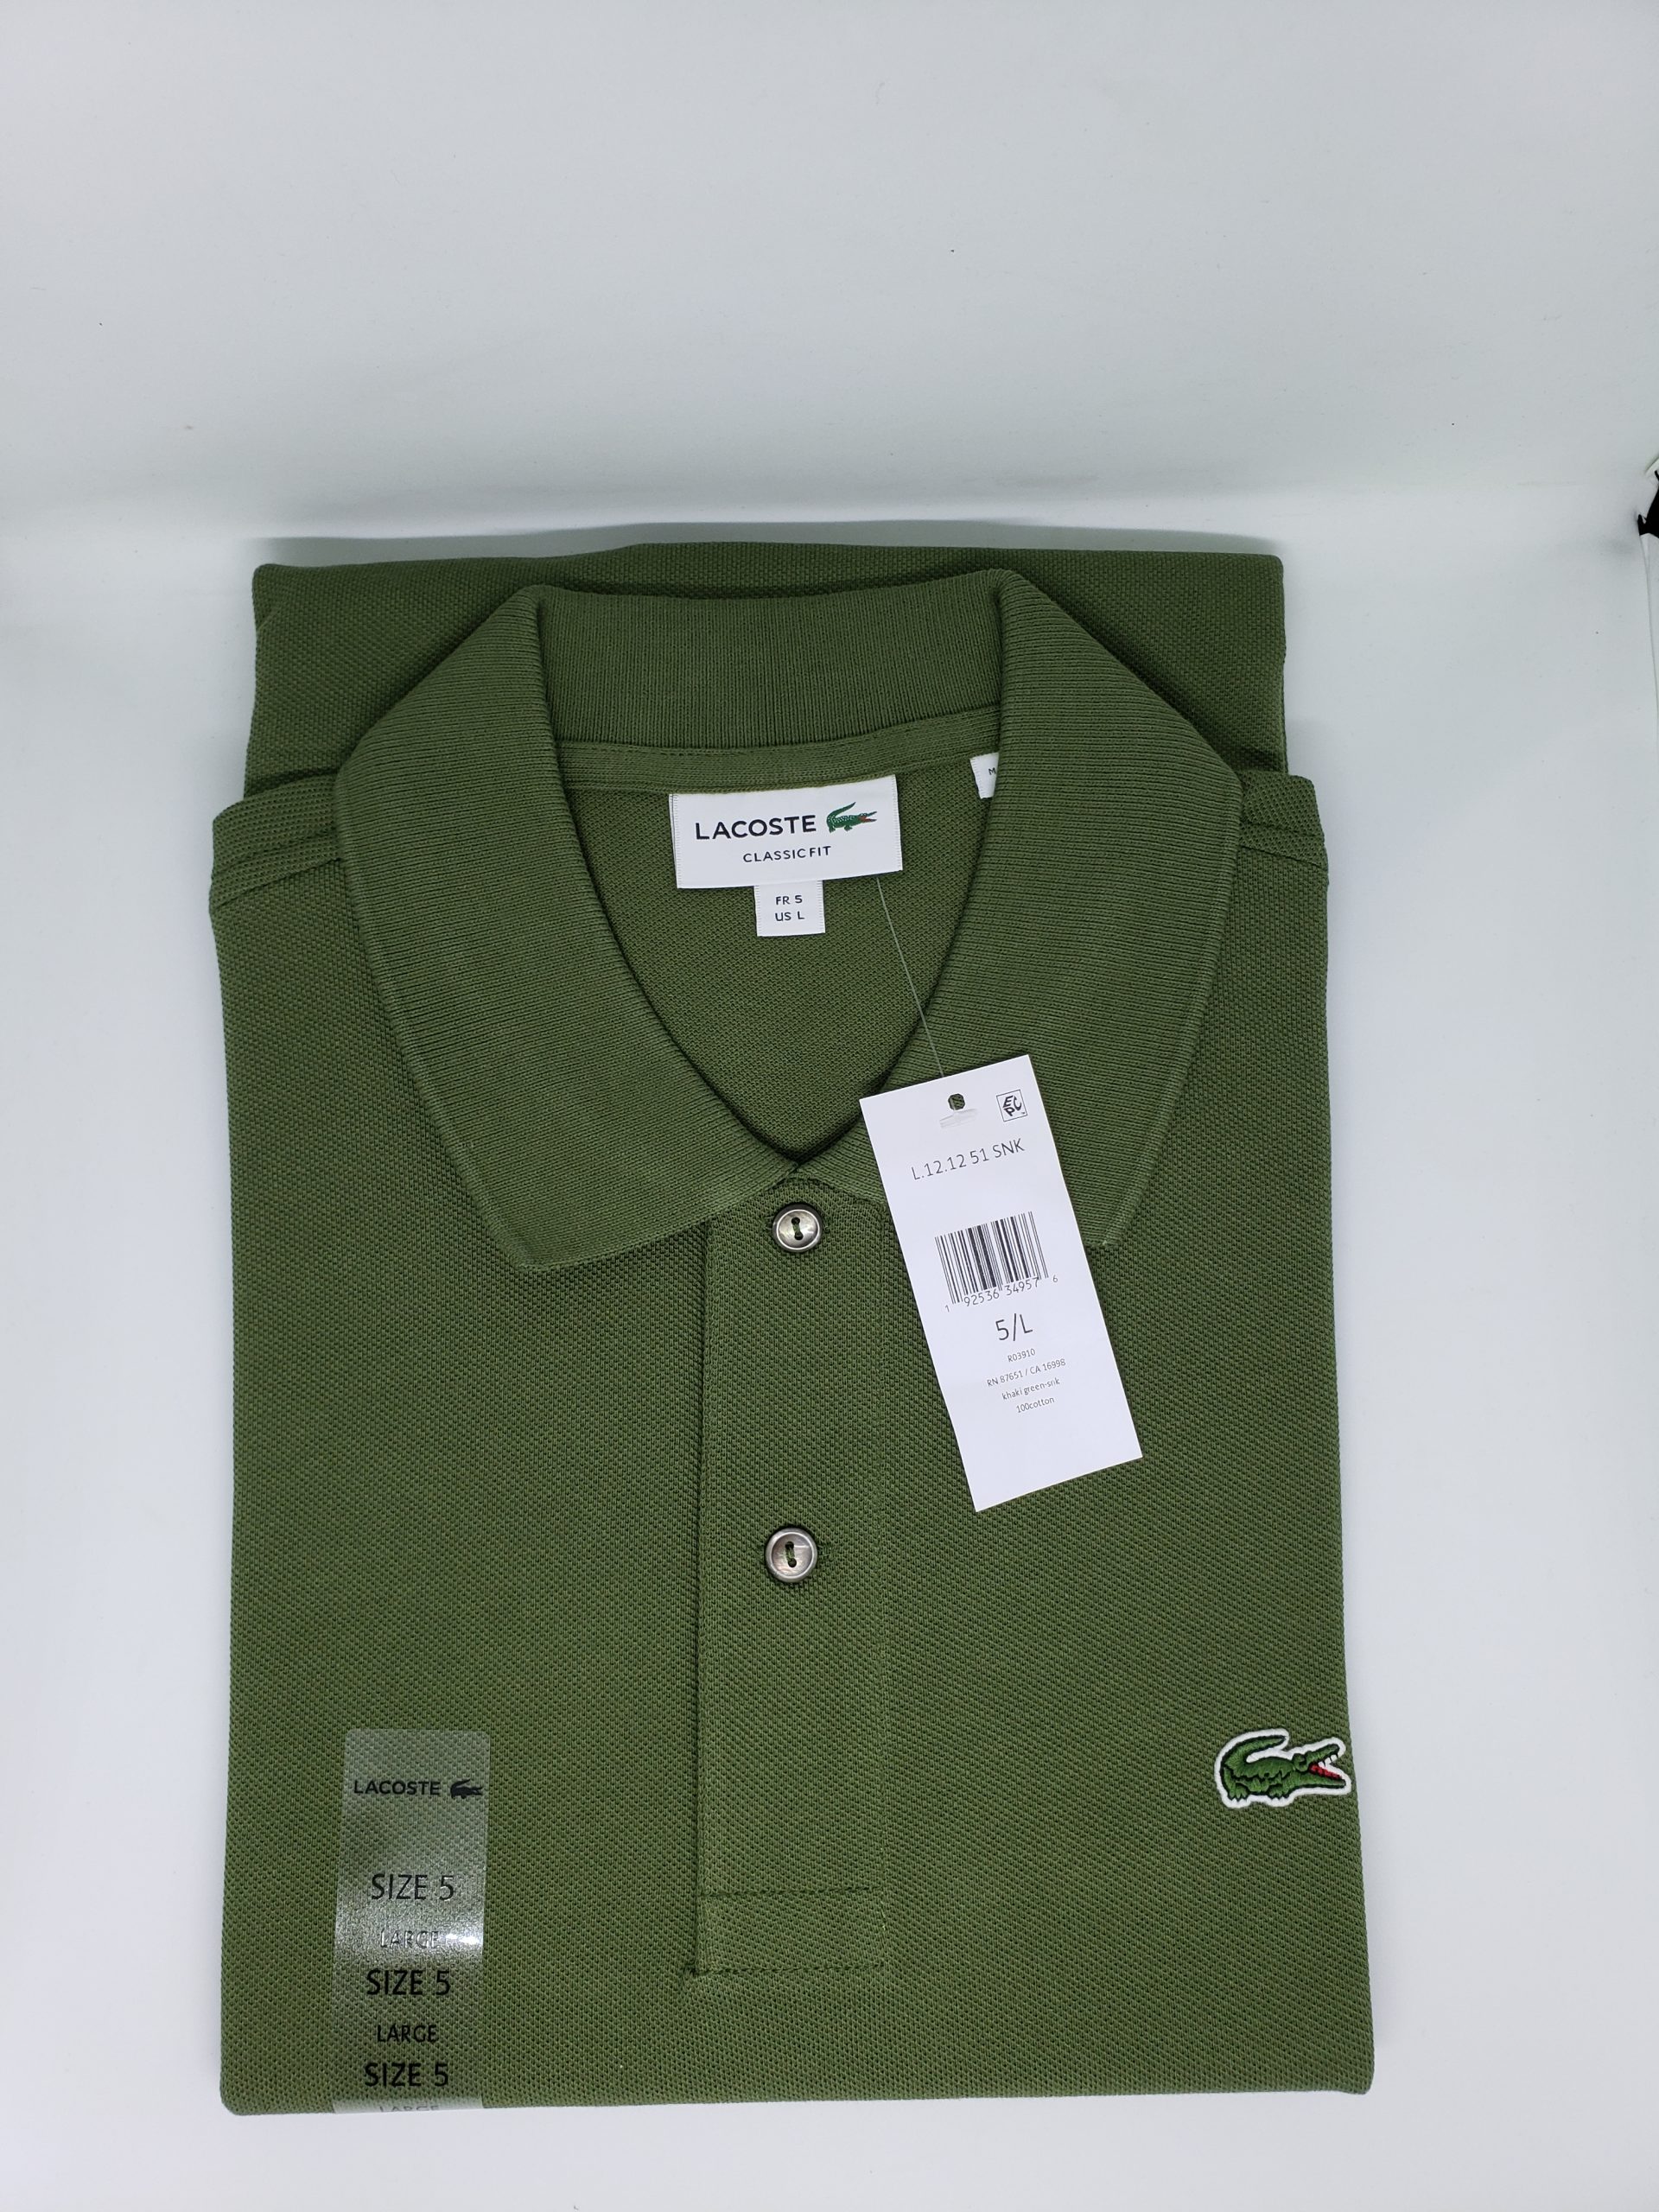 erwt Niet modieus in stand houden Lacoste Clasic Fit Polo Shirts 100% cotton. - SNSGIFTS4ALL